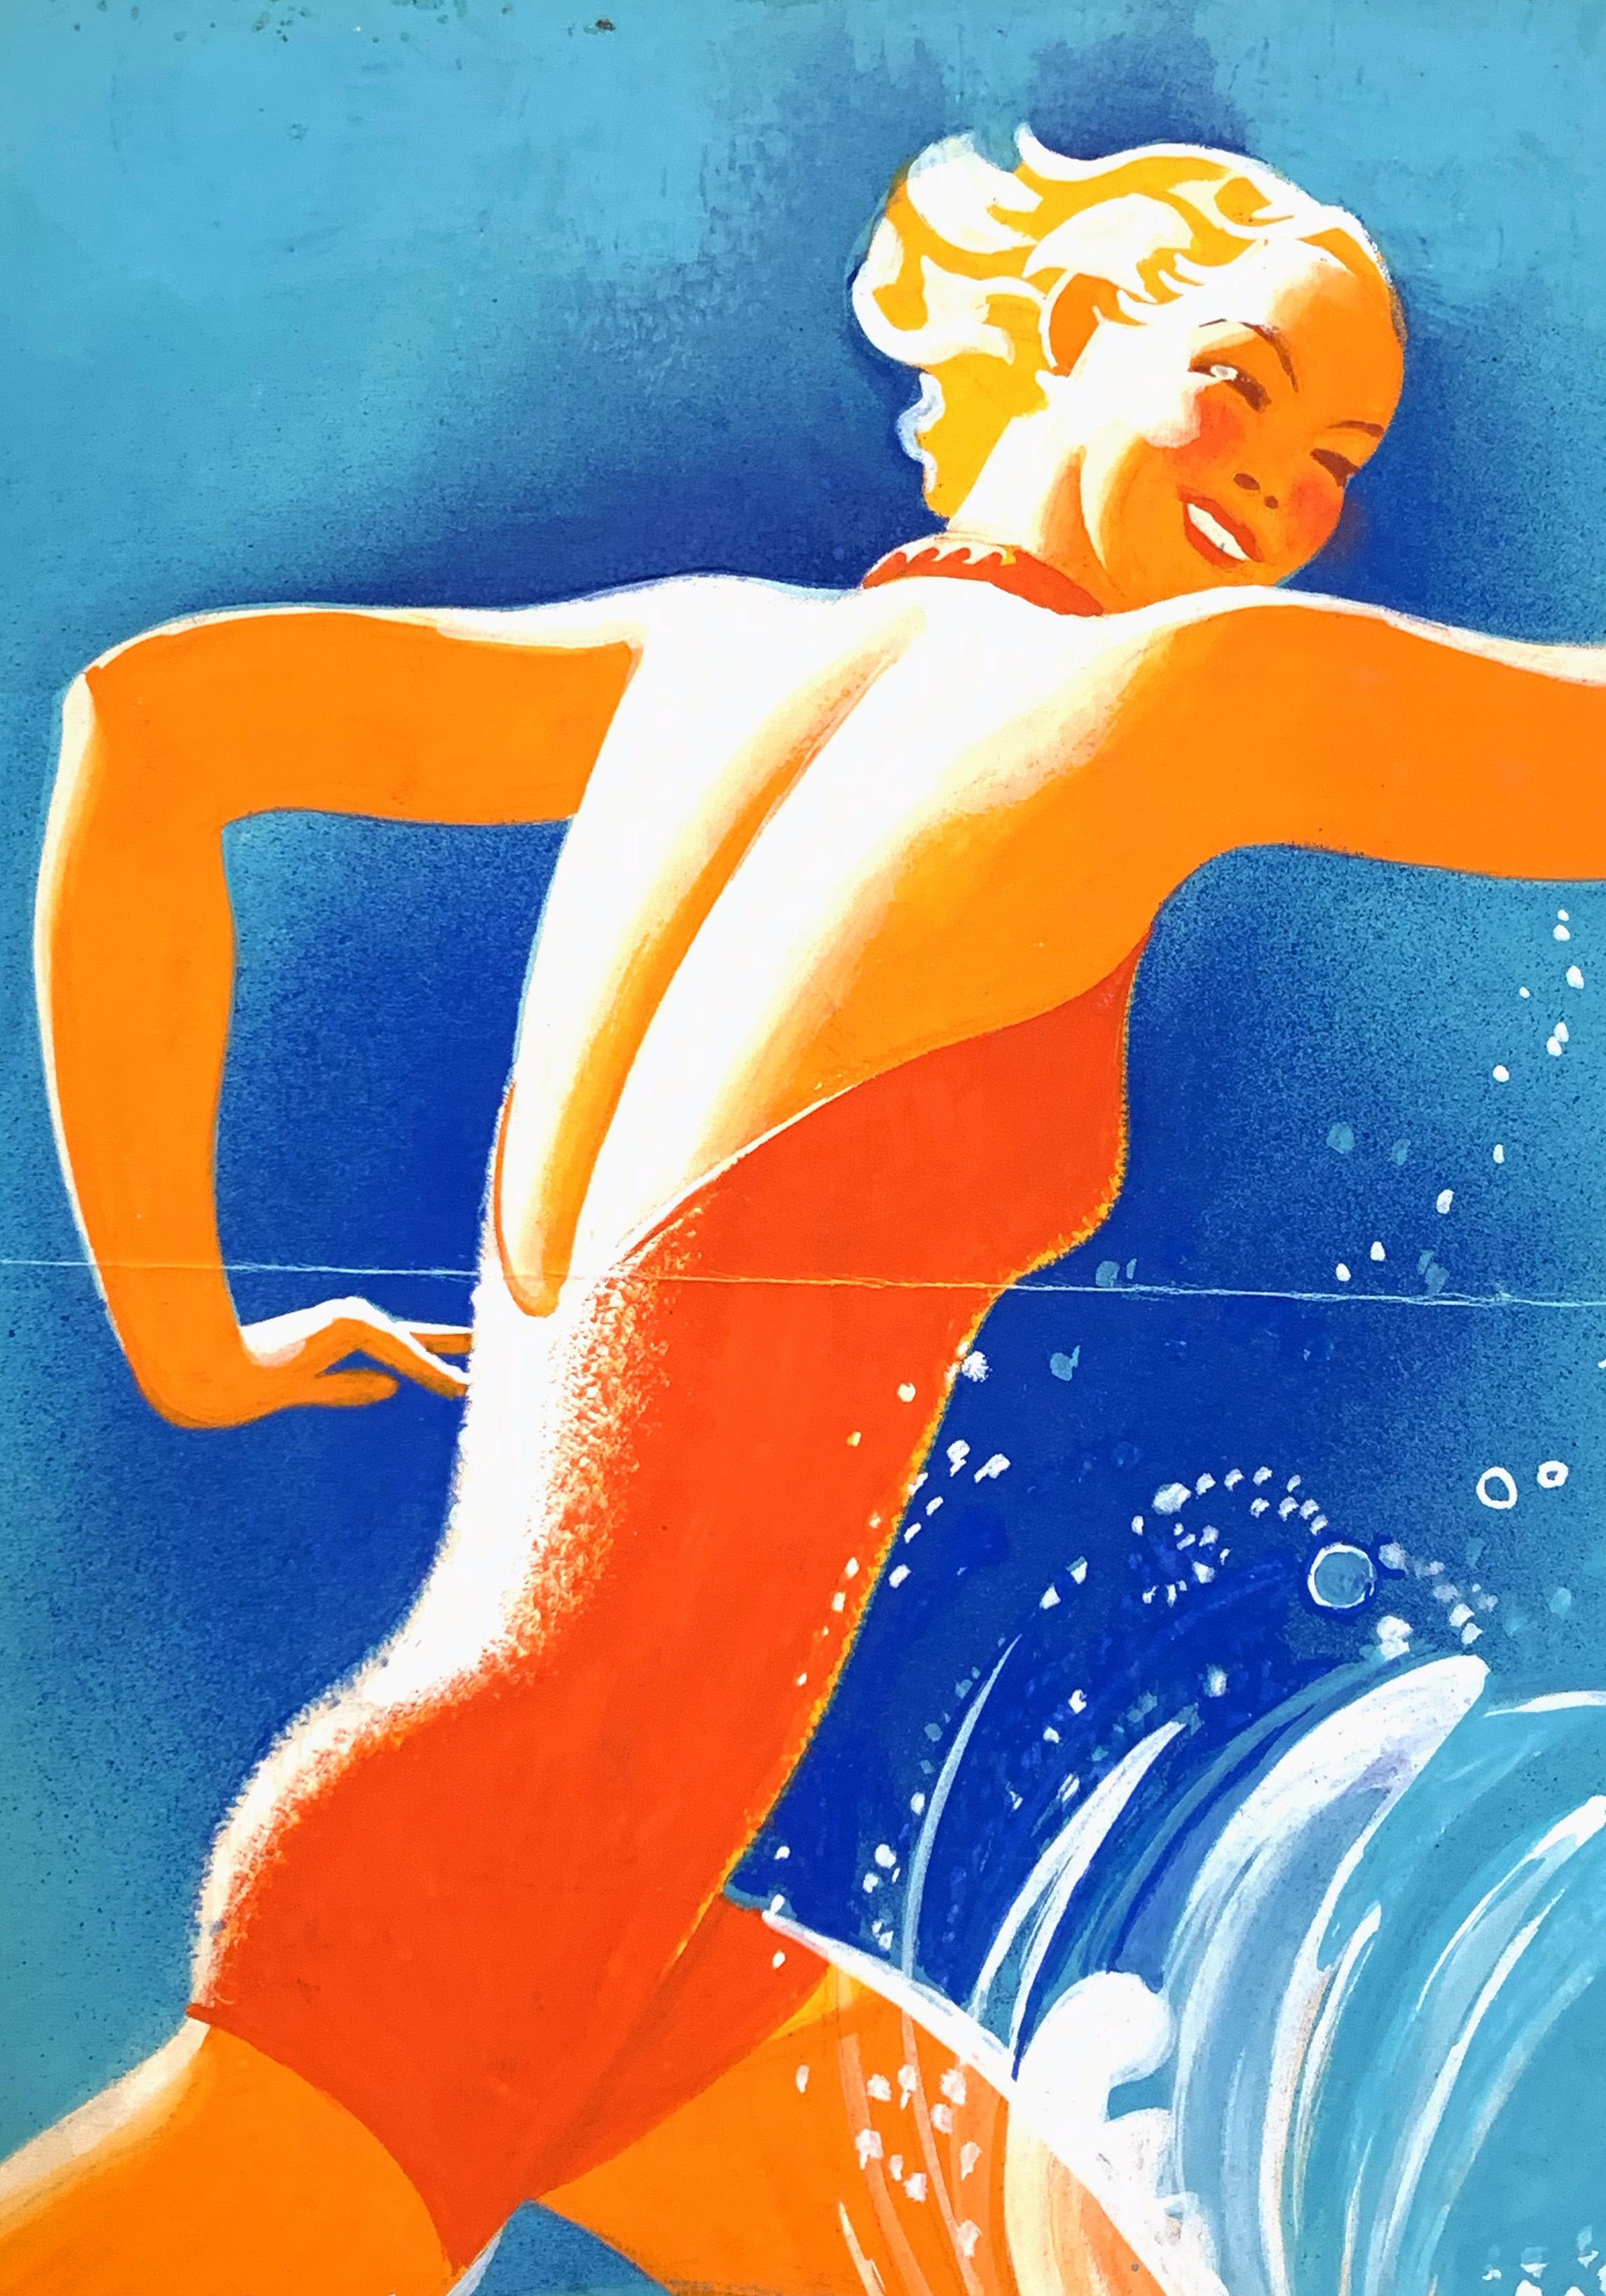 Painted in vivid, glowing colors by Robin Artine Smith, this depiction of a 1940-era blonde in a tangerine-hued swimsuit striding into the surf is a superb example of sophisticated, high-energy Art Deco graphic art. Probably painted for a poster or